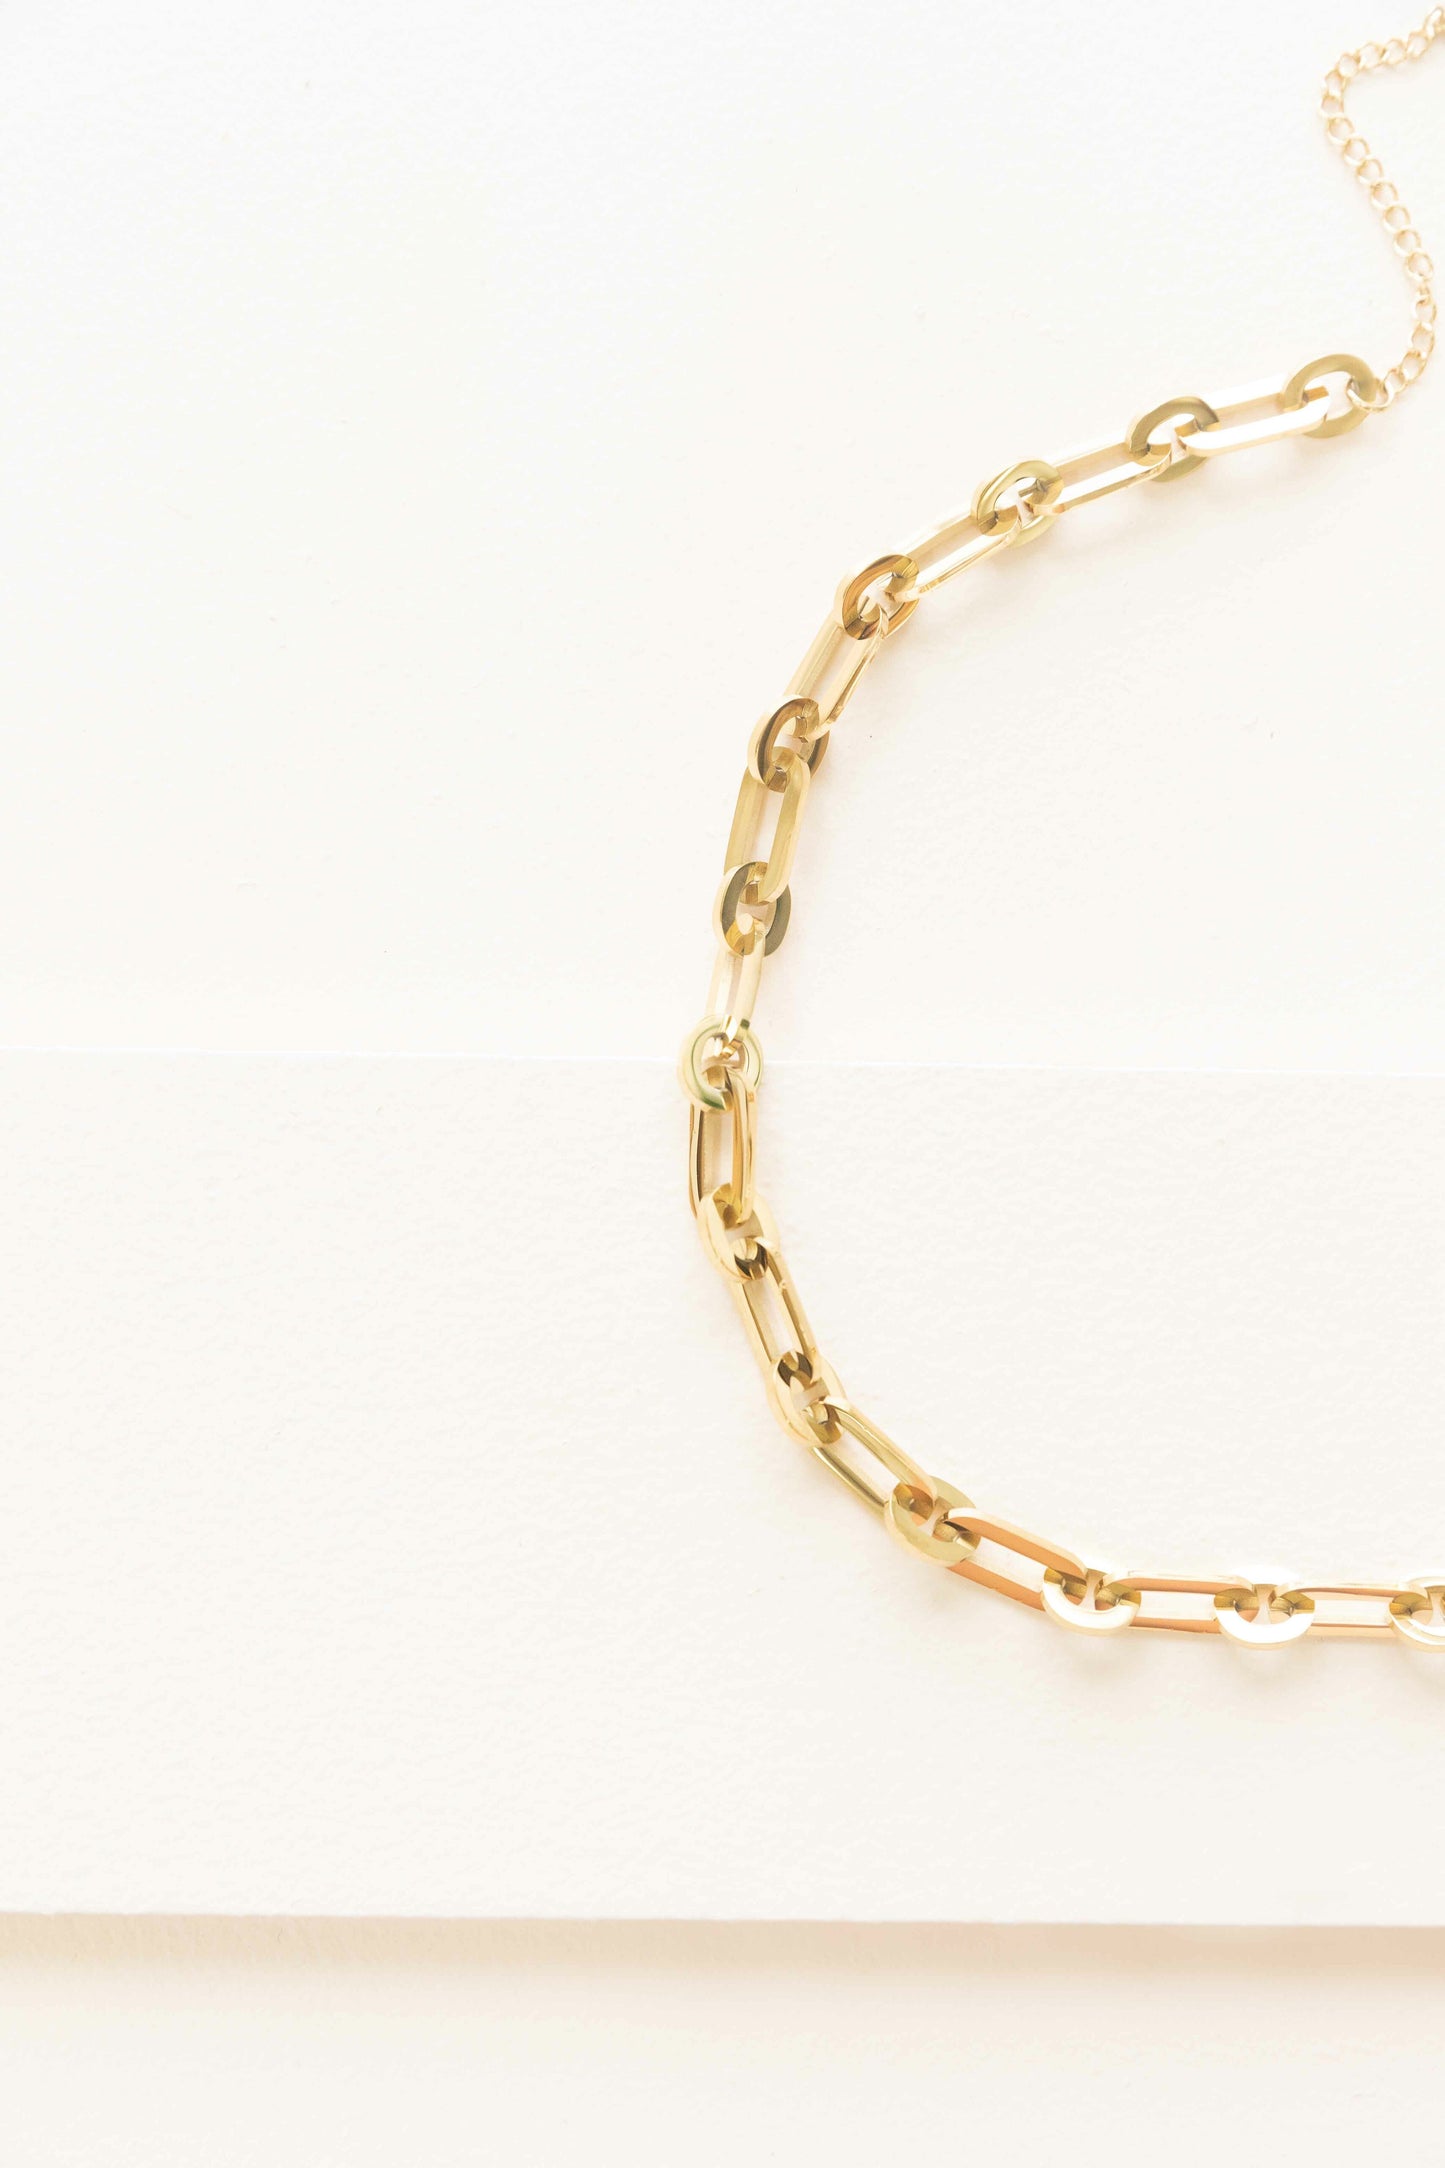 Overawe Large Chain Link Necklace (14K)